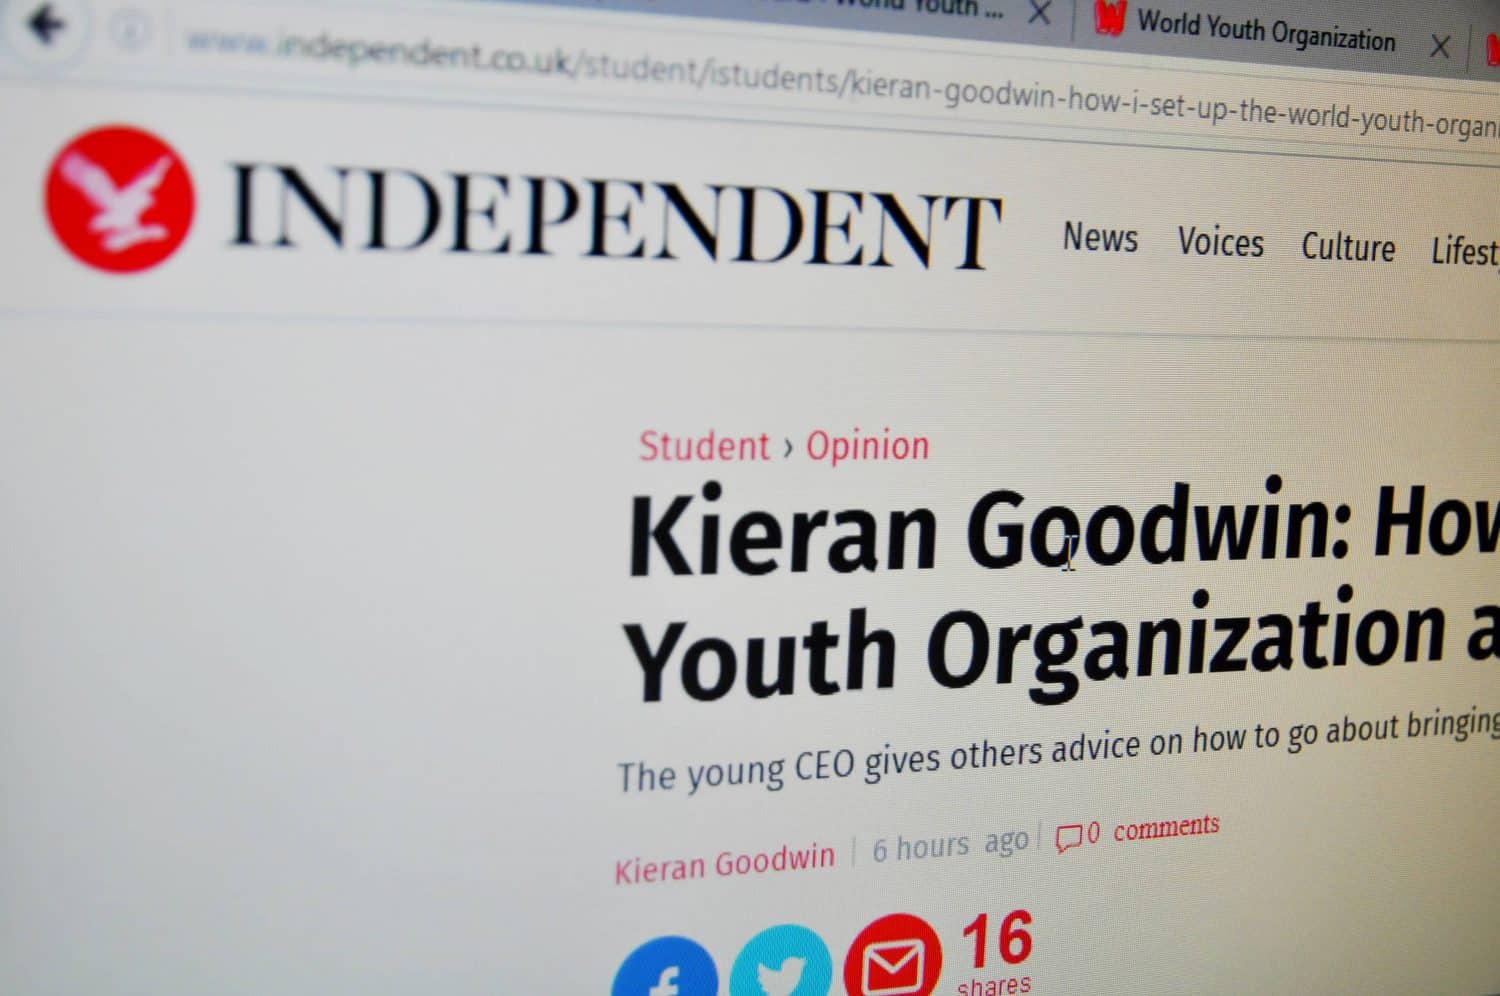 We are featured in The Independent